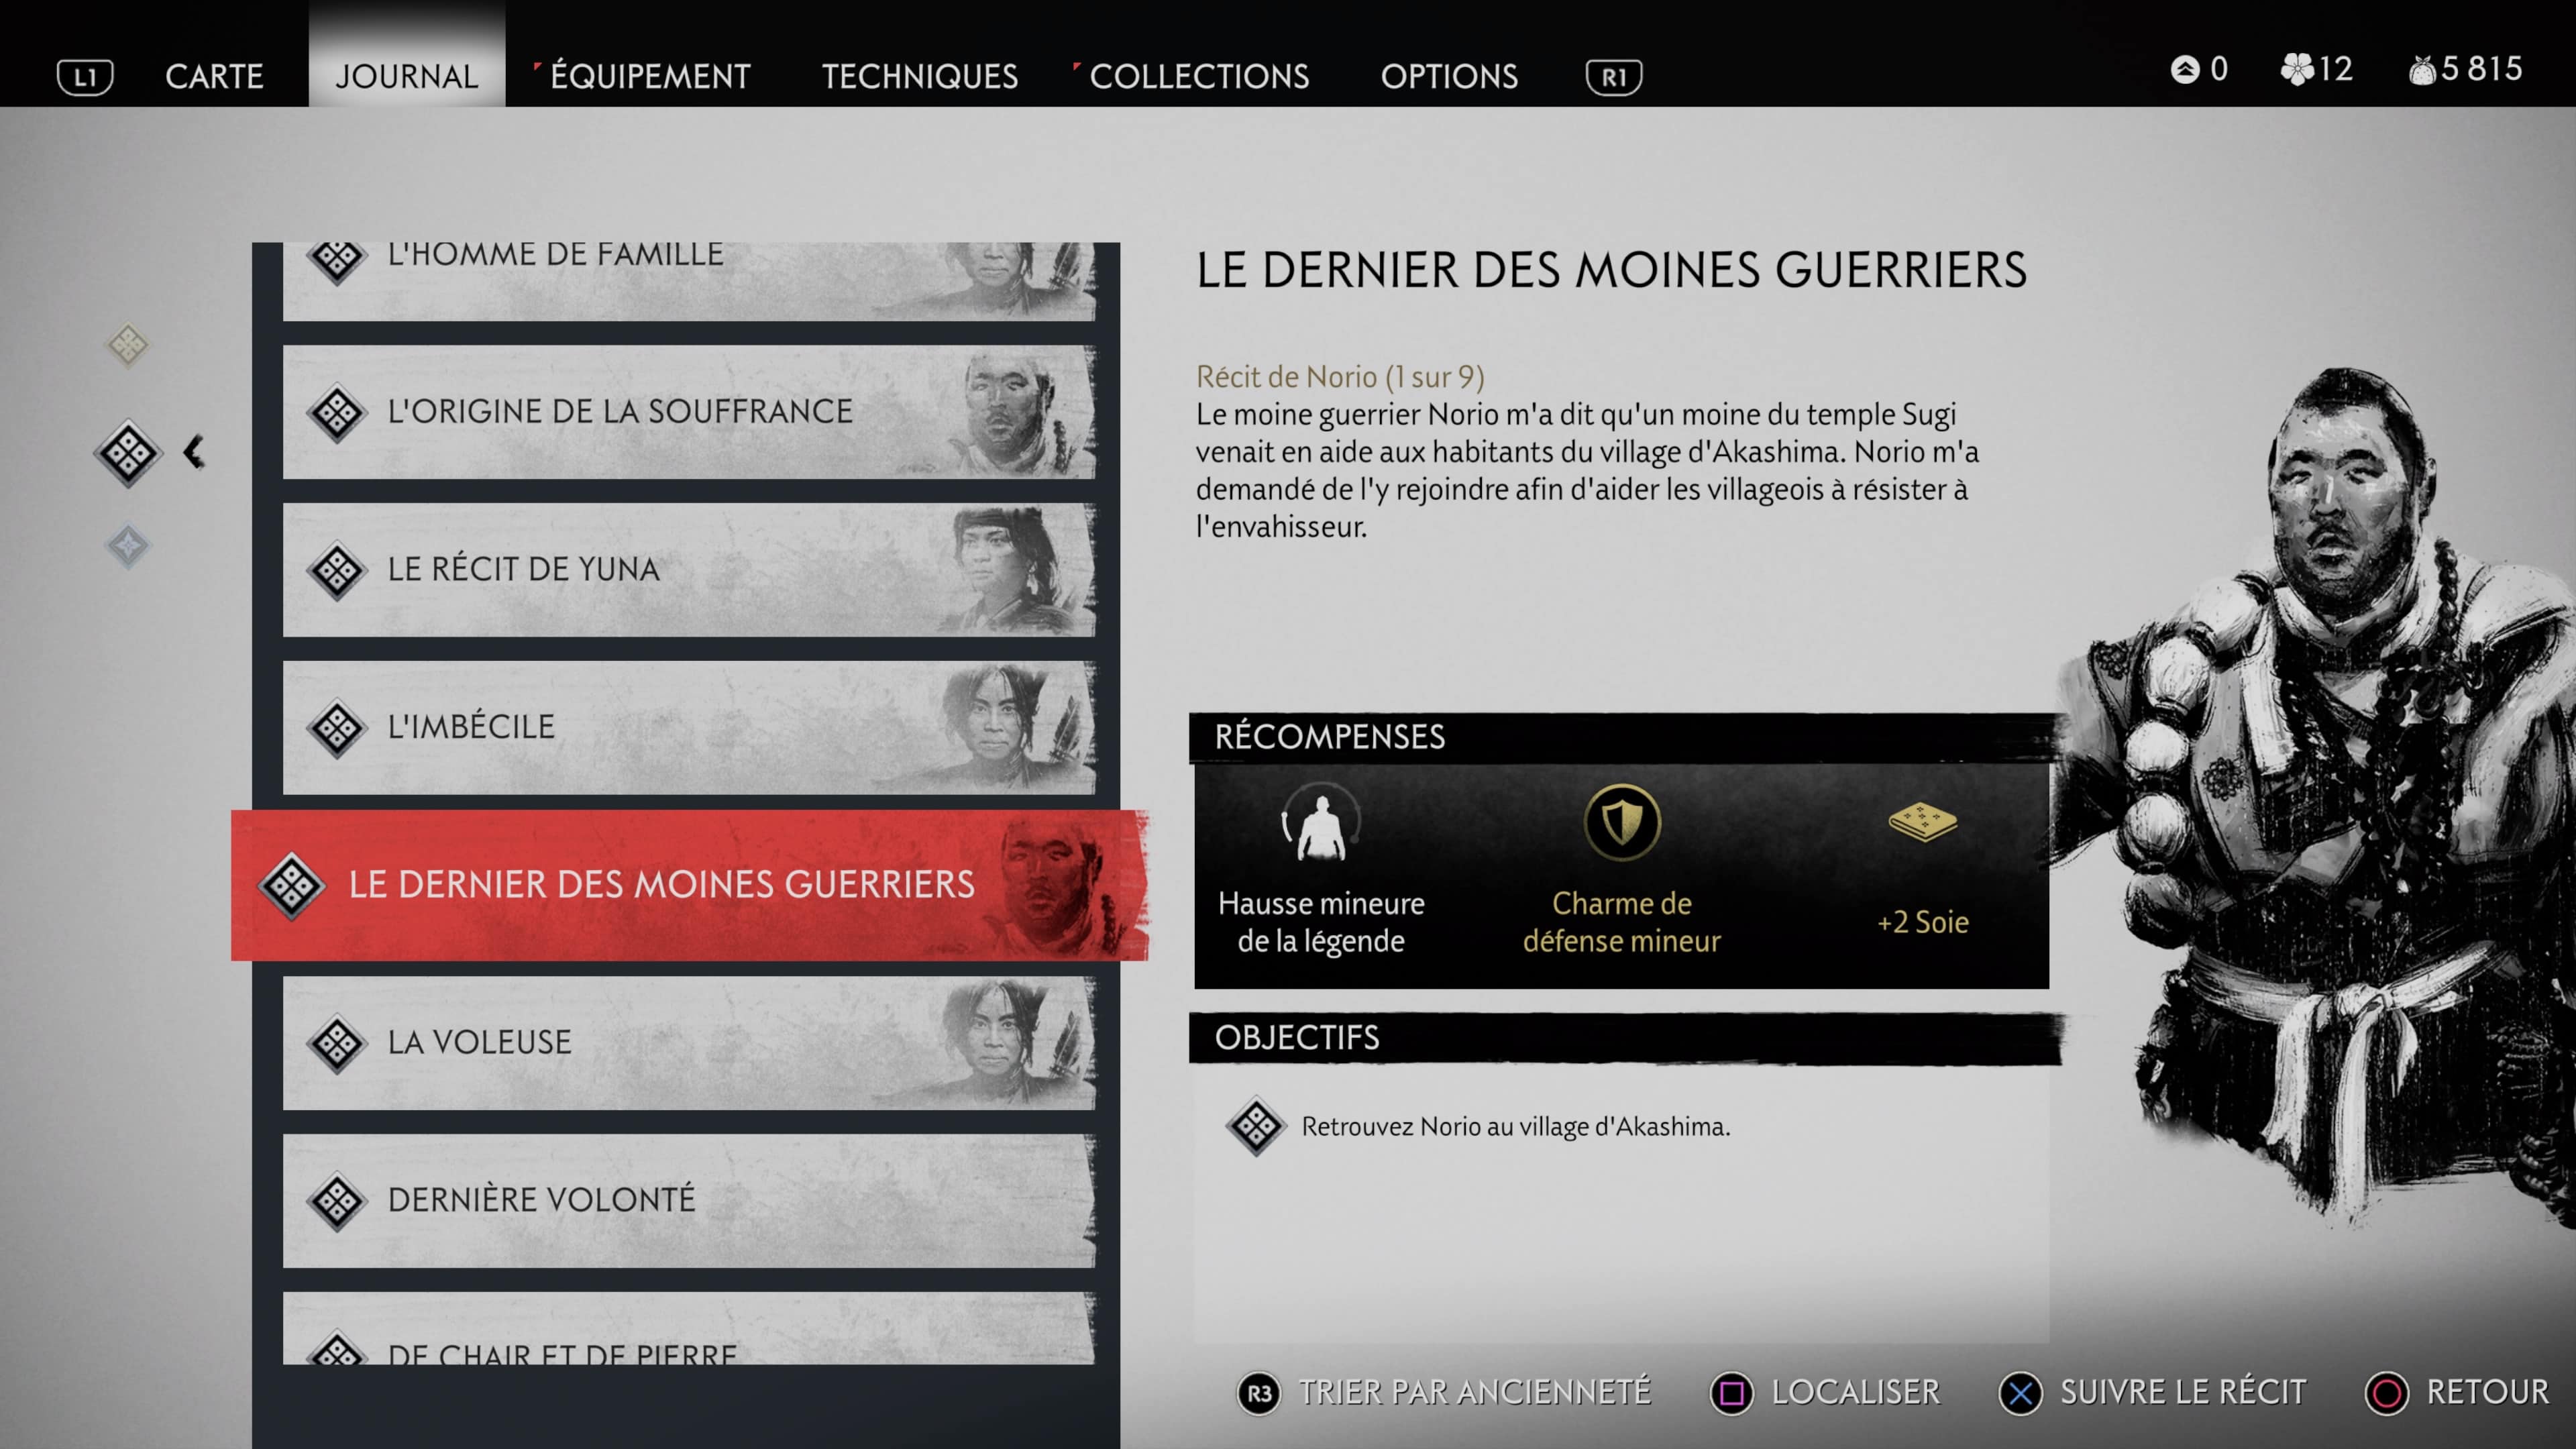 Ghost of tsushima dernier moines guerriers 1 2